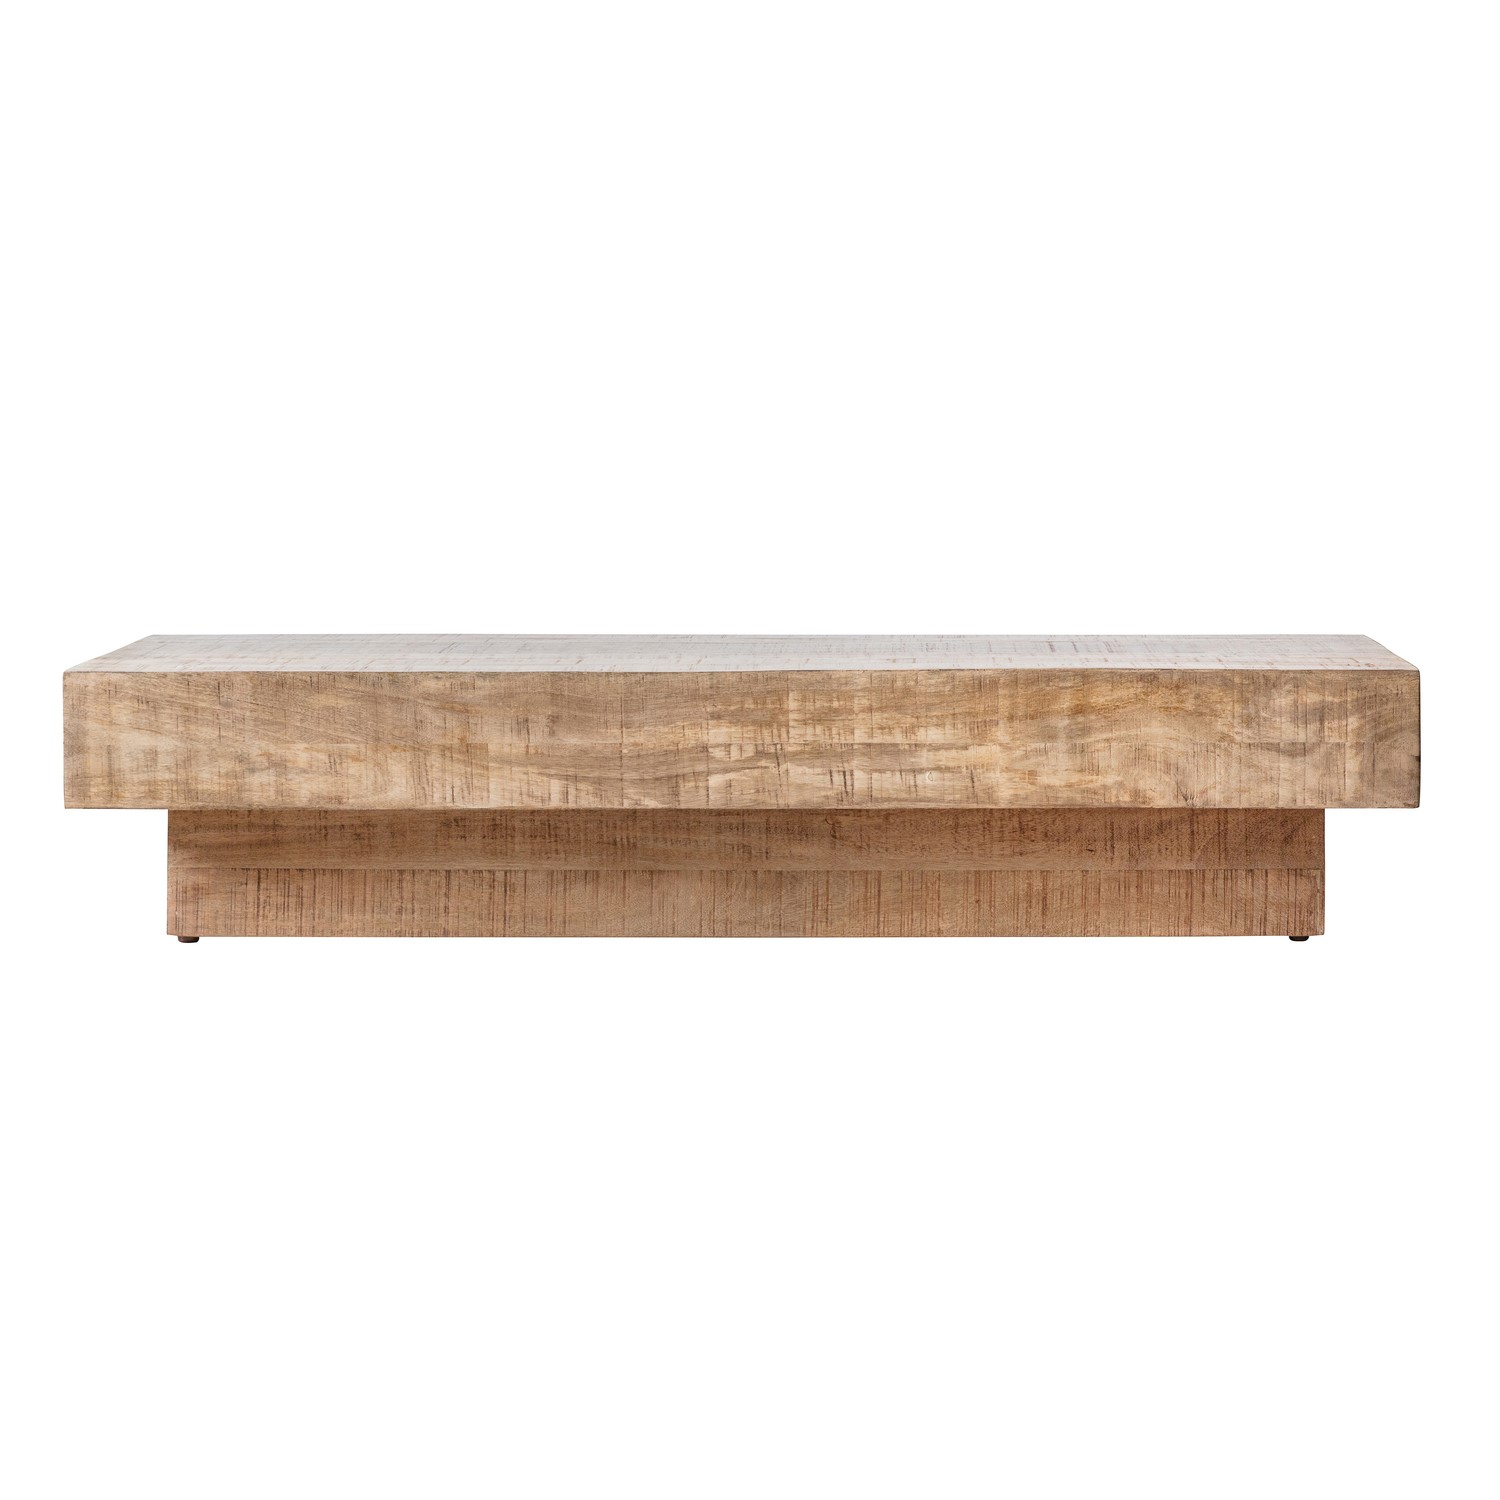 Read more about Large rustic mango wood coffee table caspian house